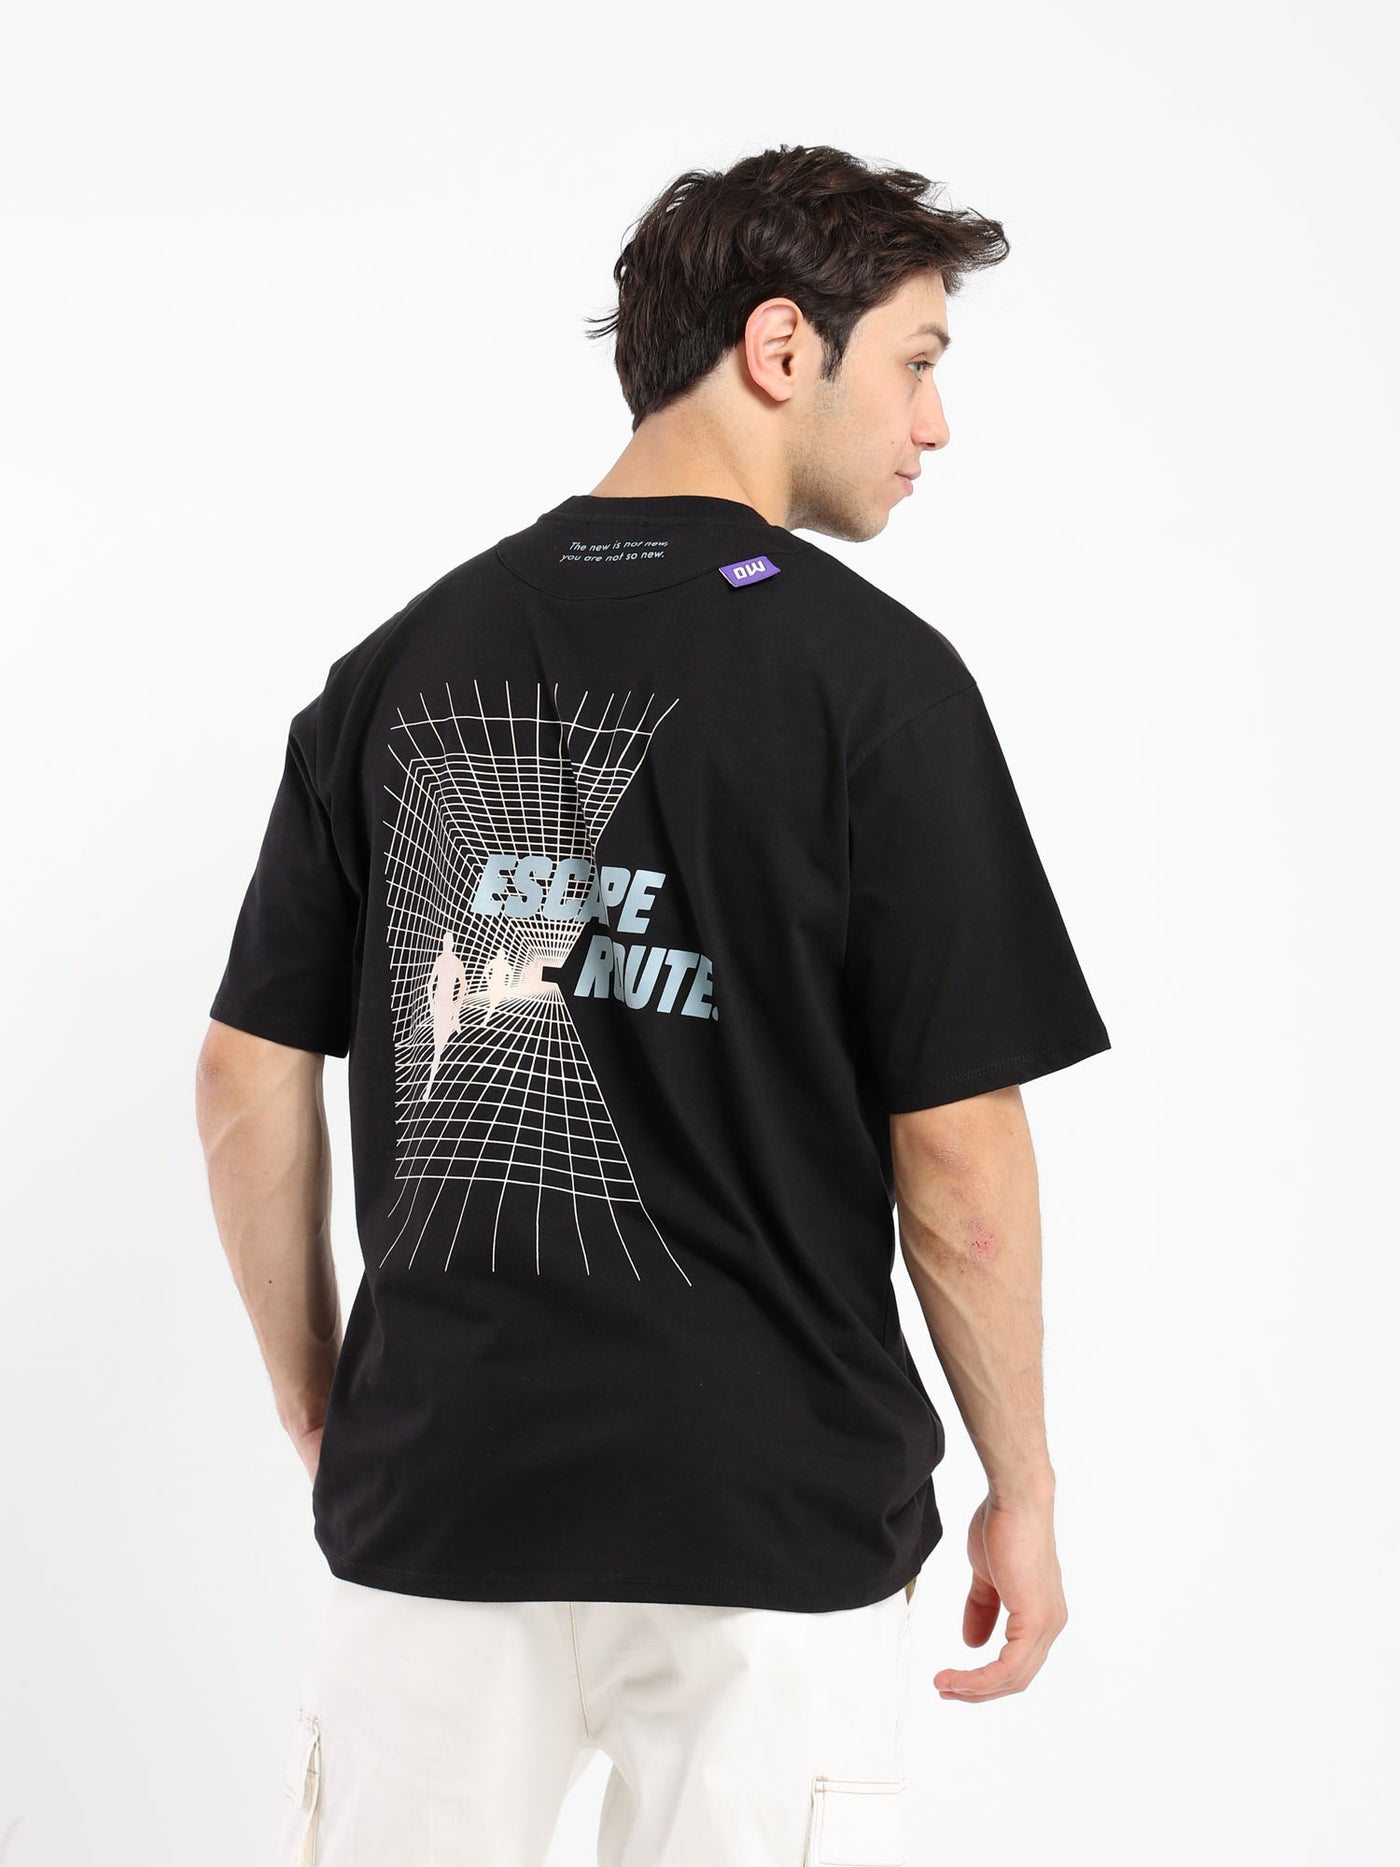 T-Shirt - Oversized - "Escape Route" Front and Back Print